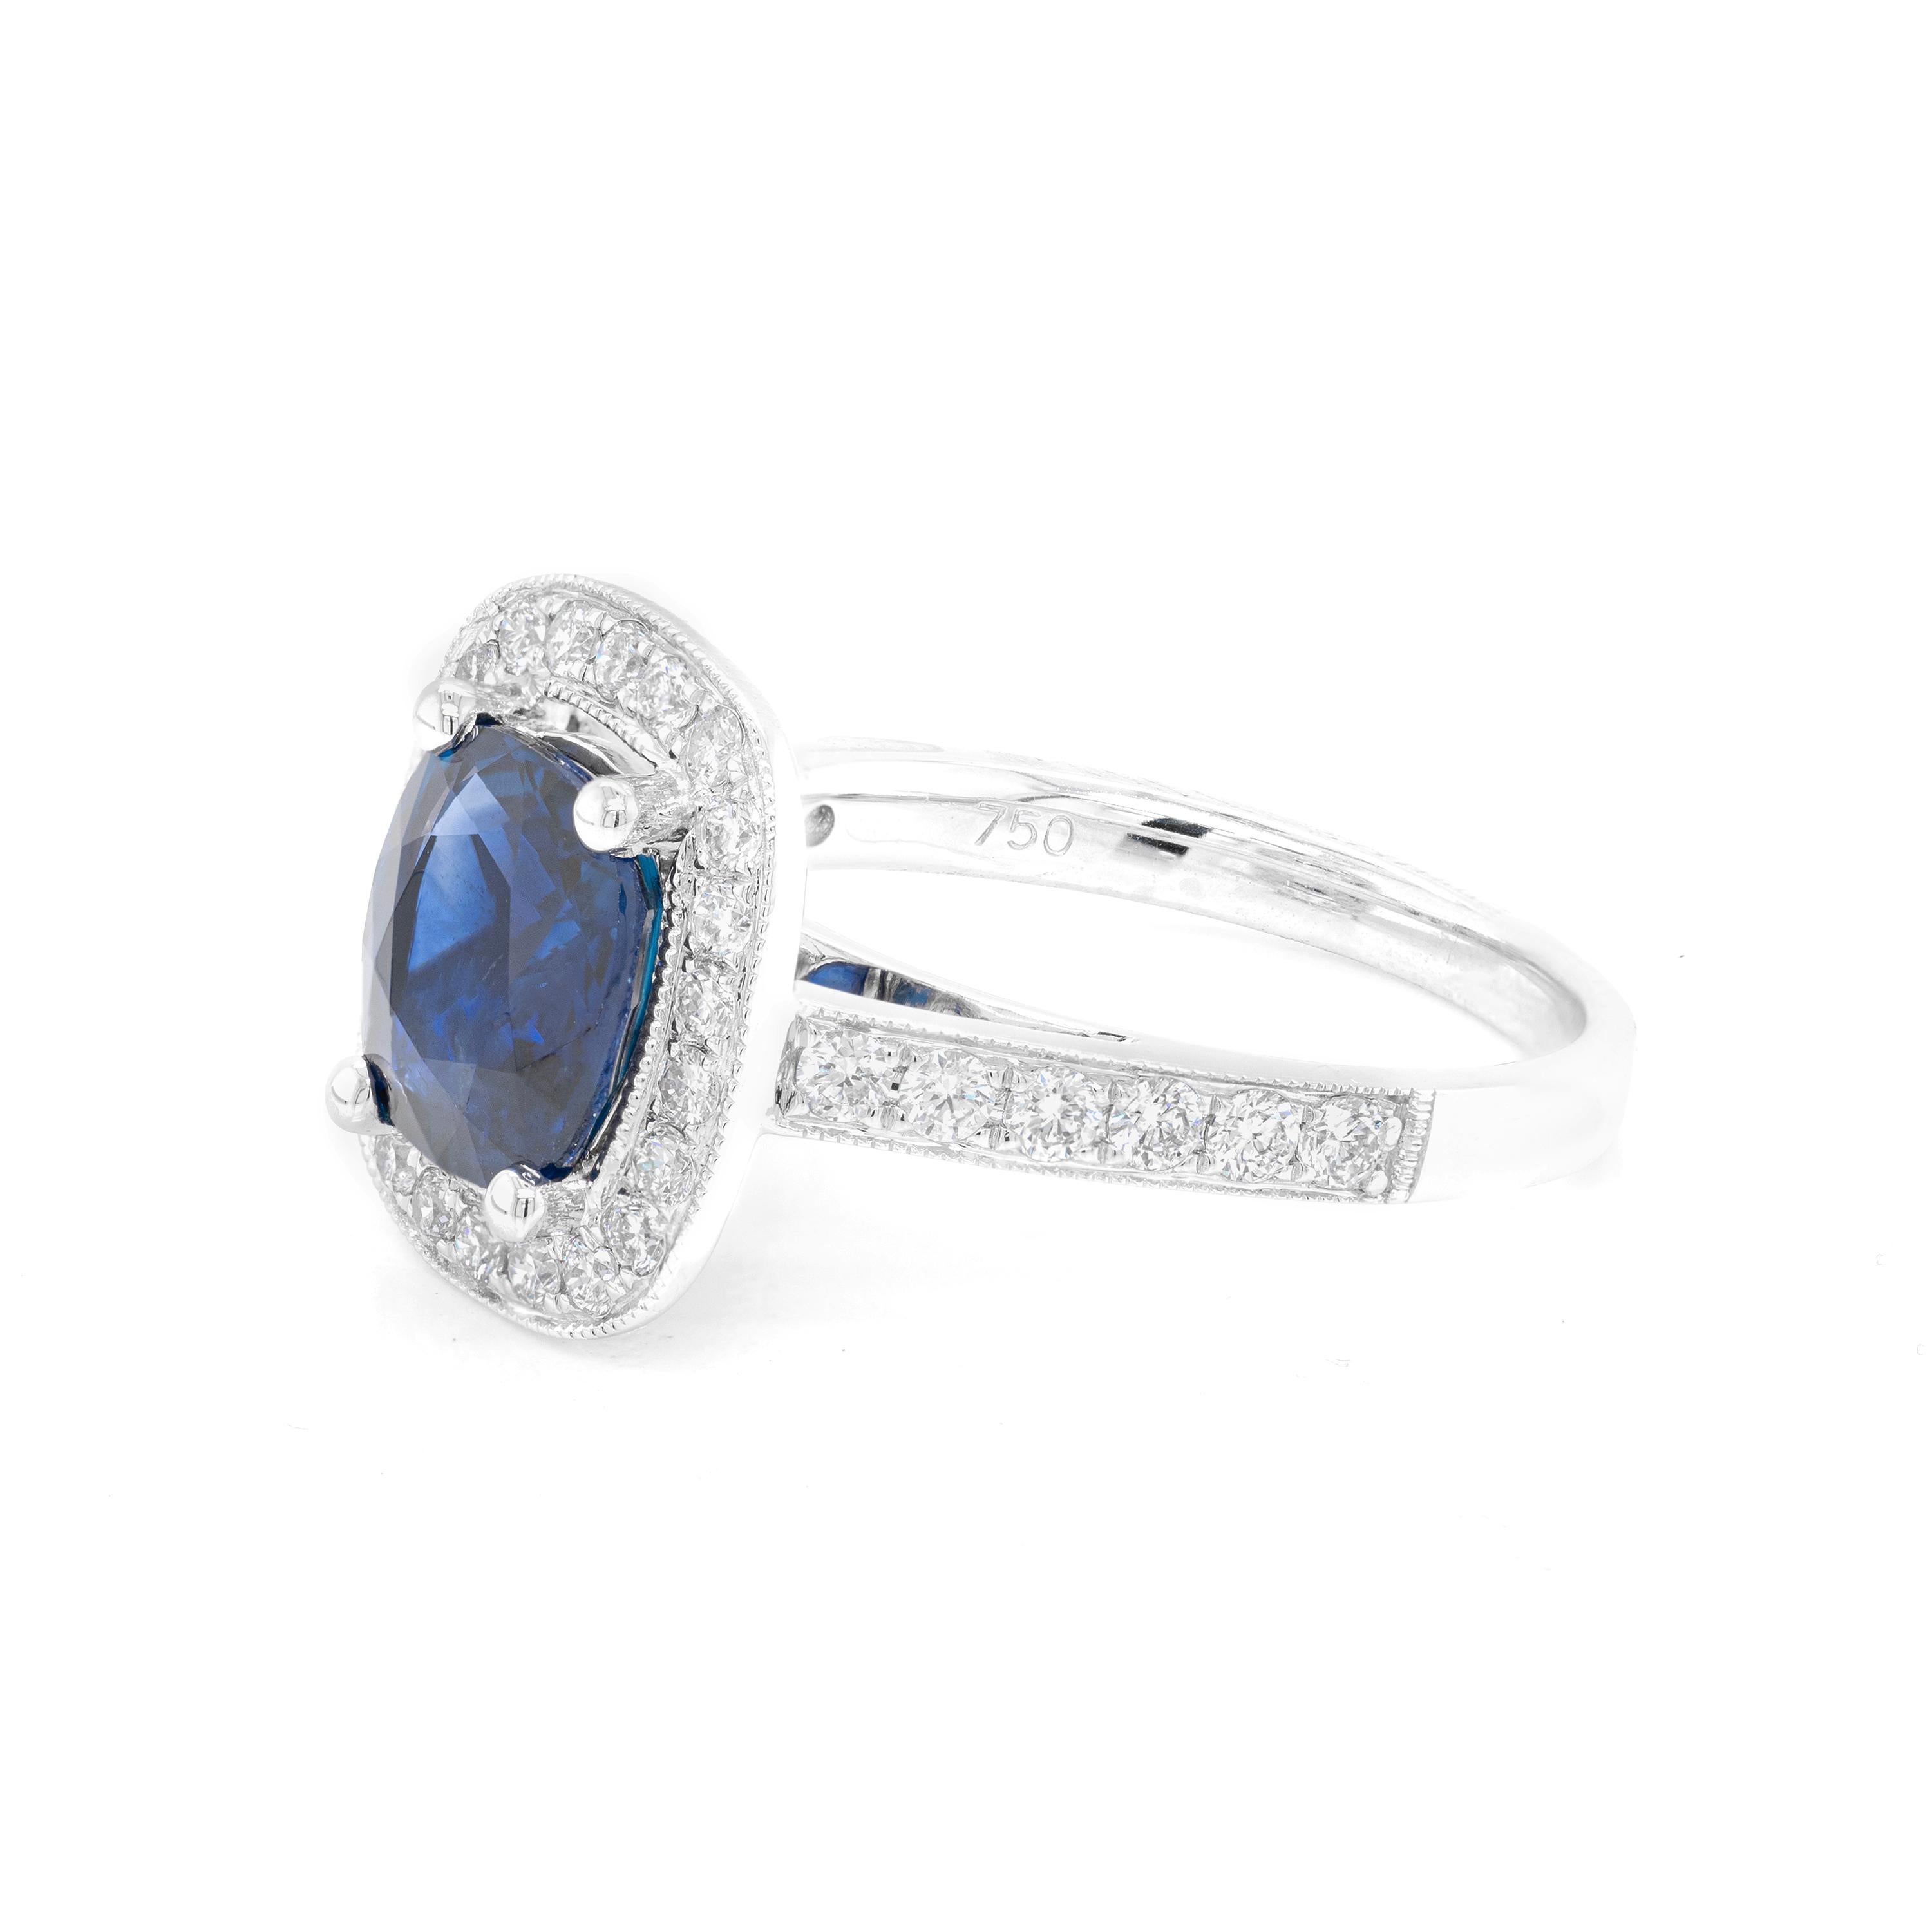 This lovely 18 carat white gold cluster ring is beautifully centred with a 2.52ct blue cushion cut sapphire, mounted in a four claw, open back setting. The vibrant stone is further highlighted by a halo of 22 round brilliant cut diamonds, all micro